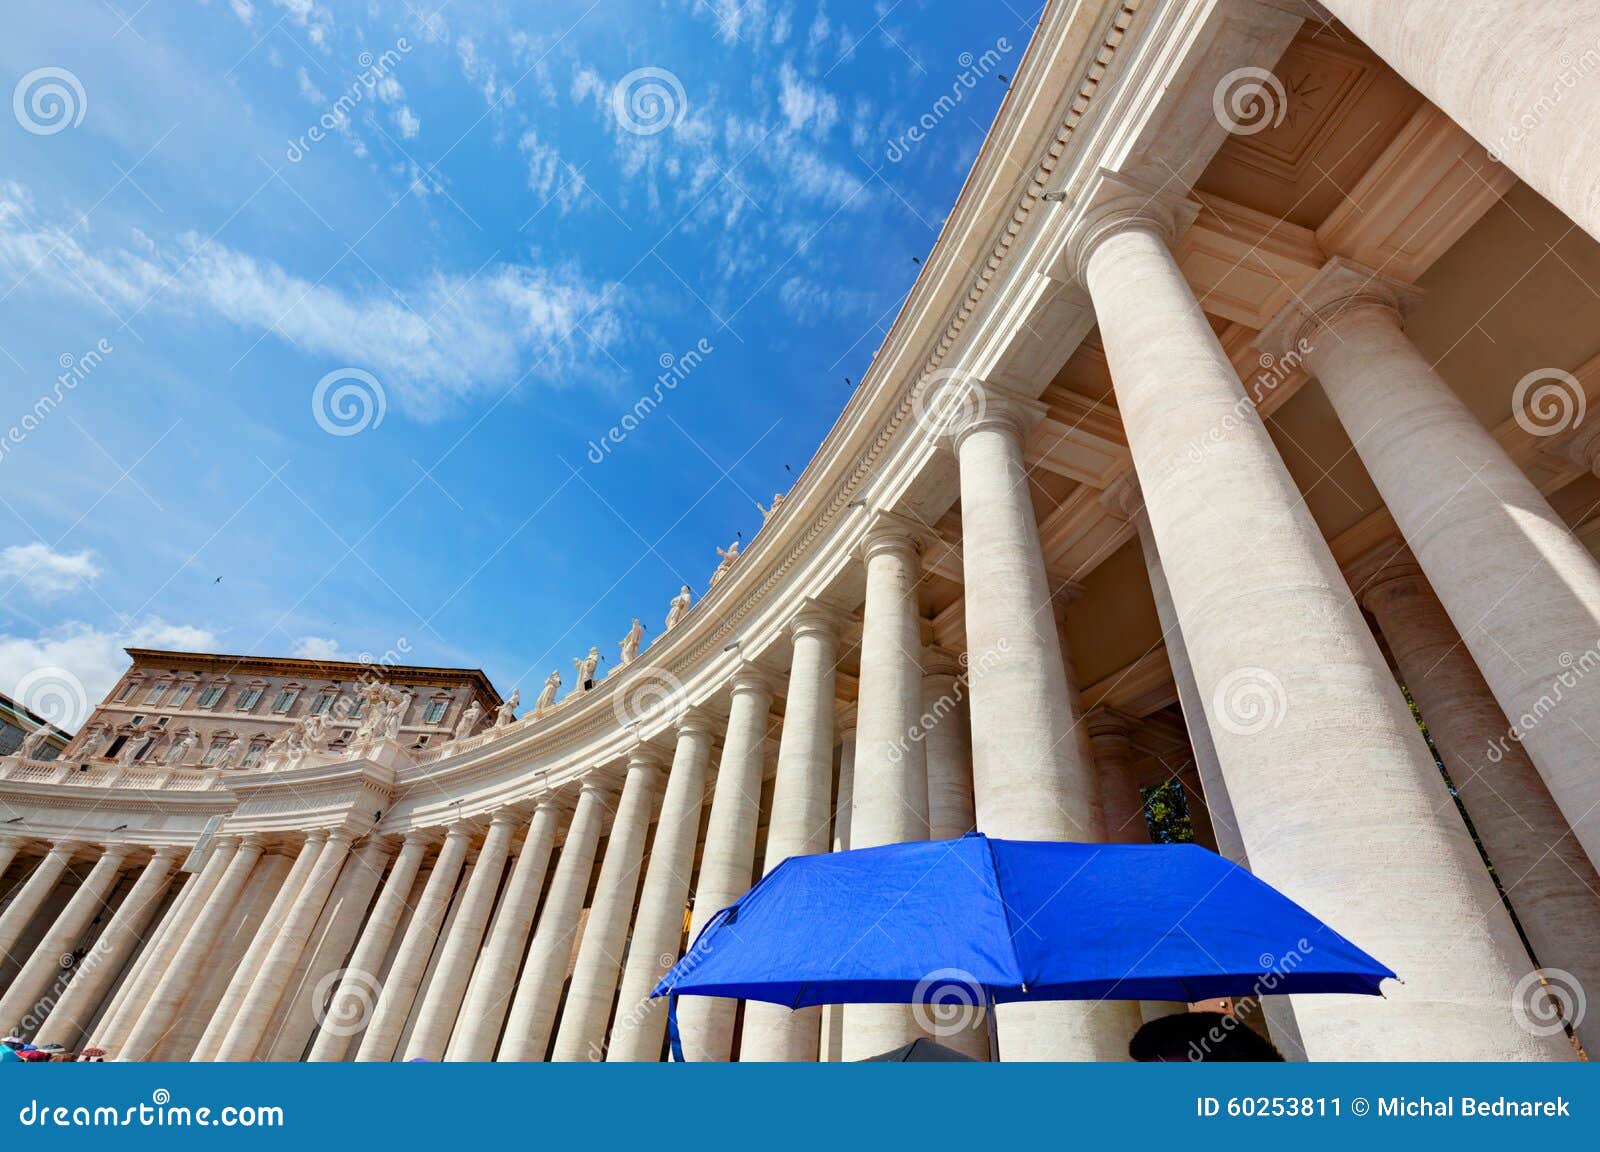 st. peter's basilica colonnades in vatican city. blue umbrella harmonizes with sky